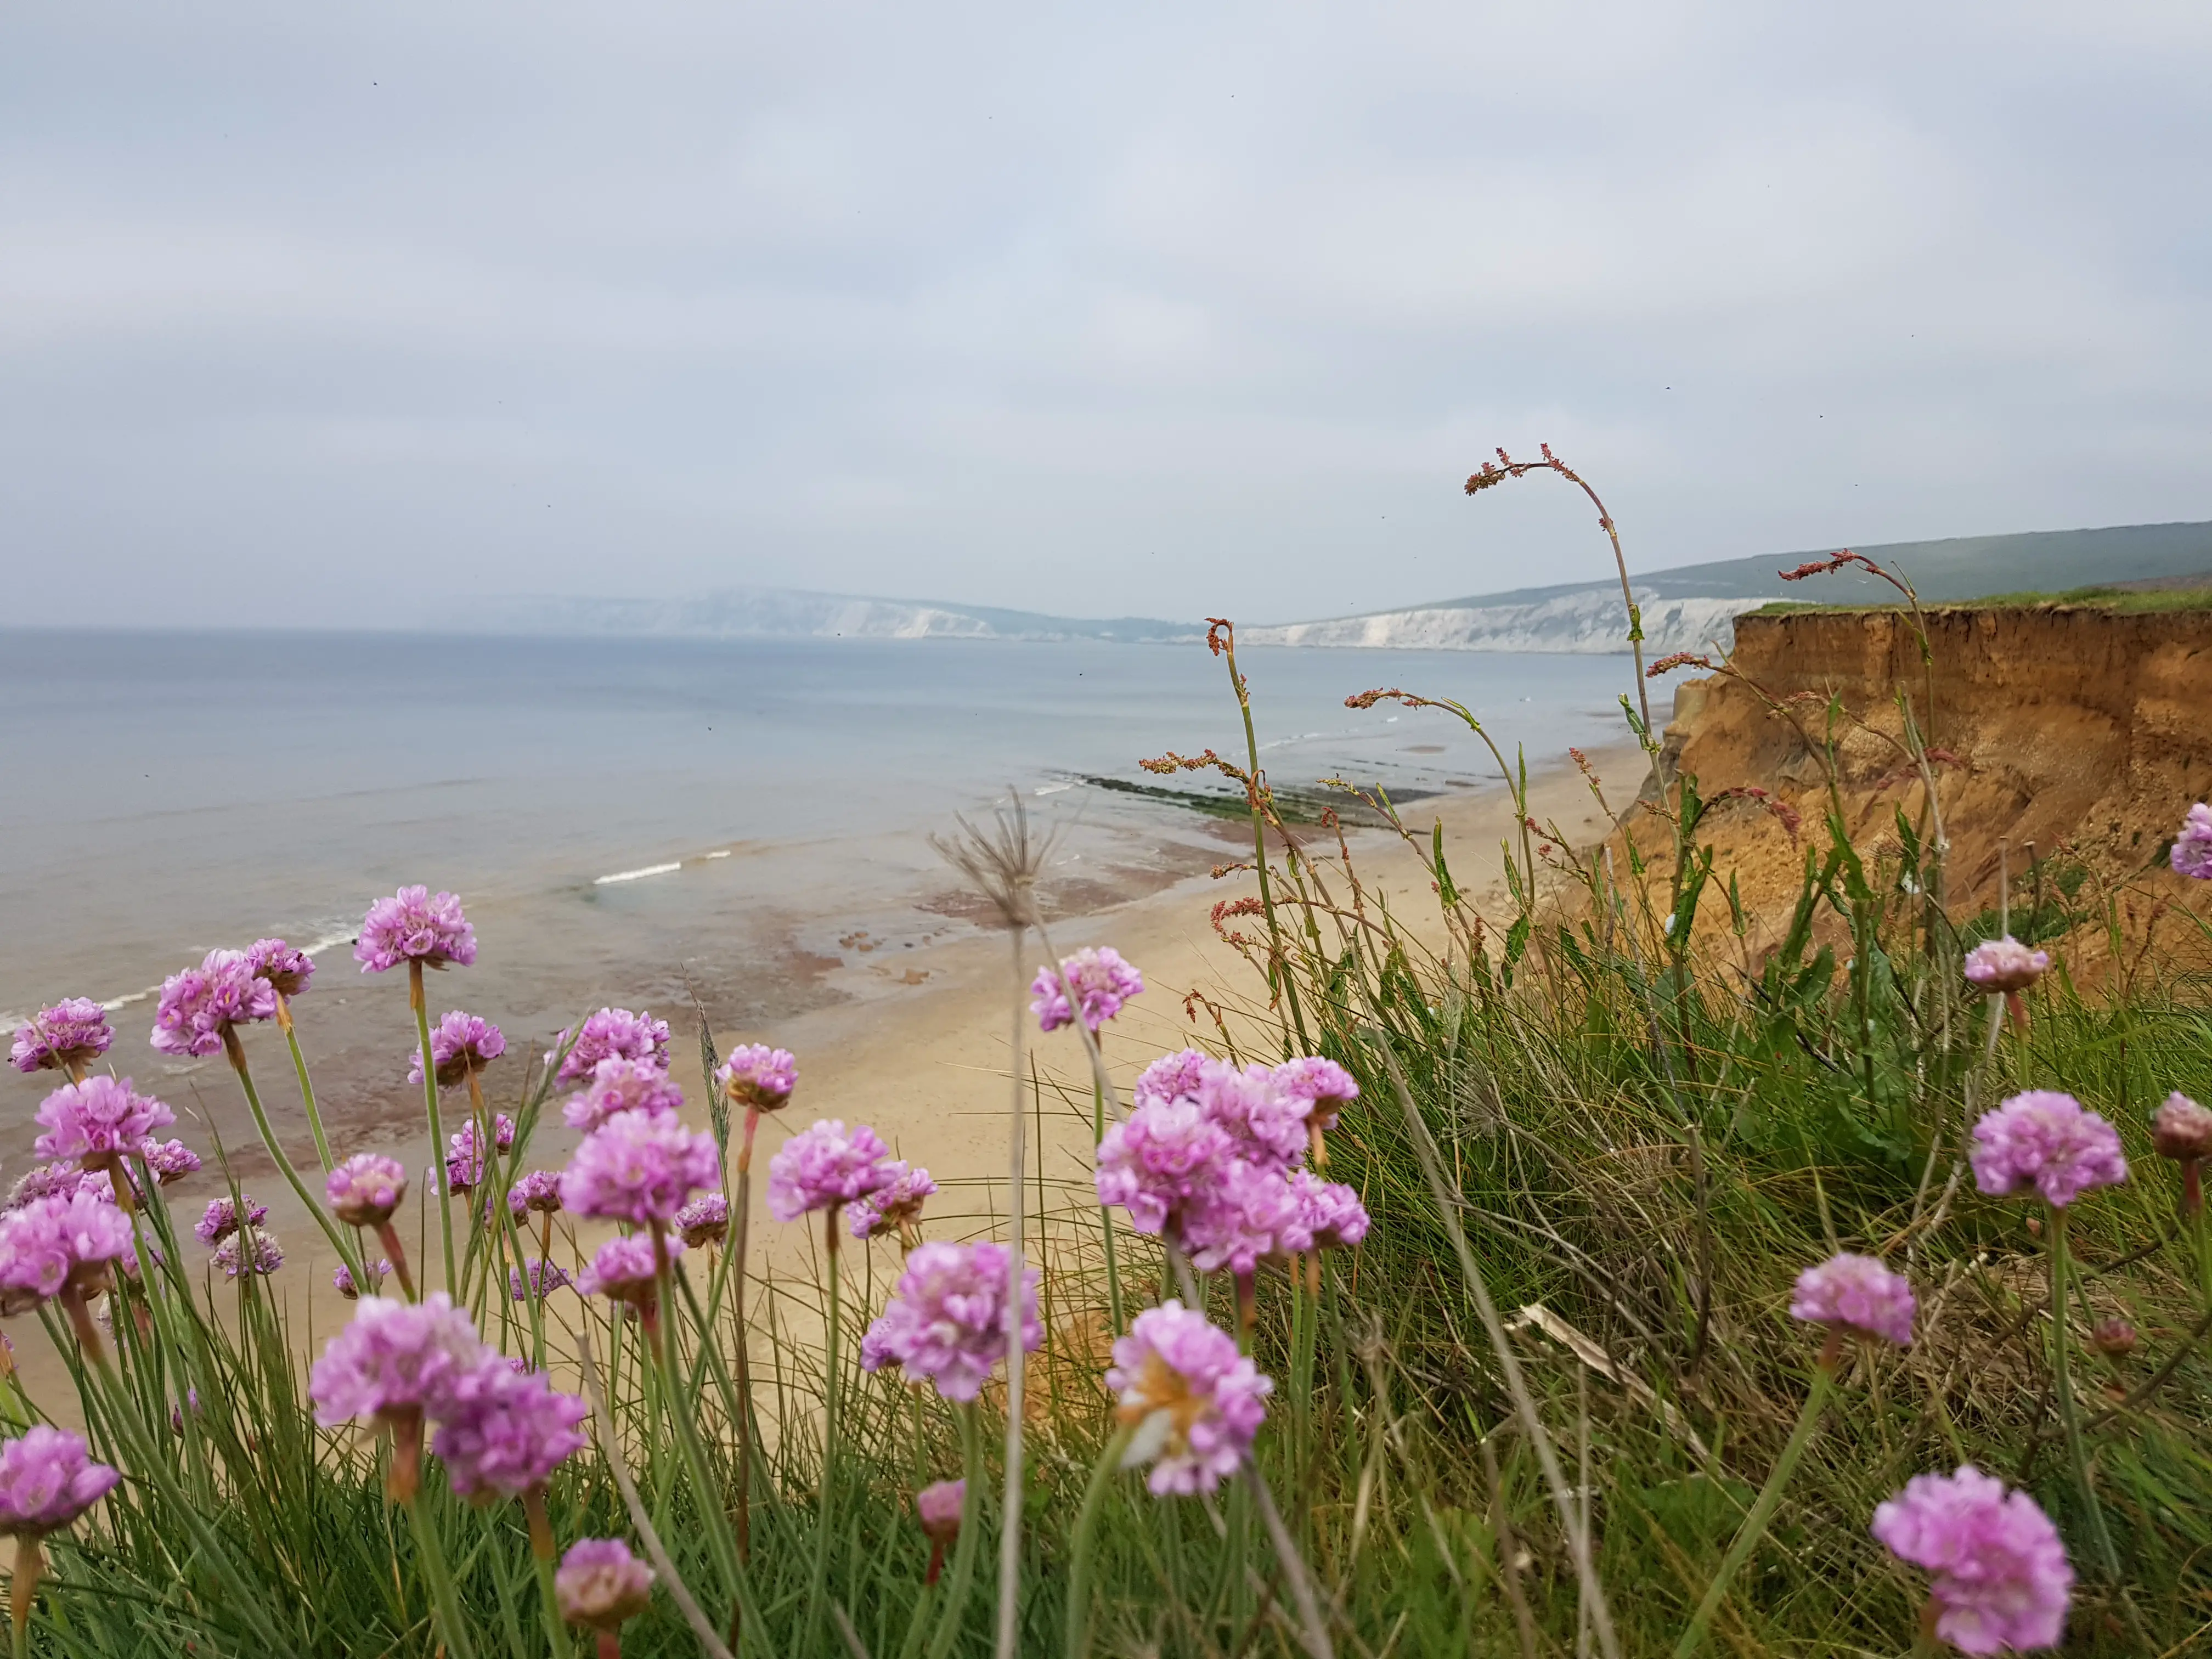 Isle of Wight things to do – TOP attractions on the Isle of Wight